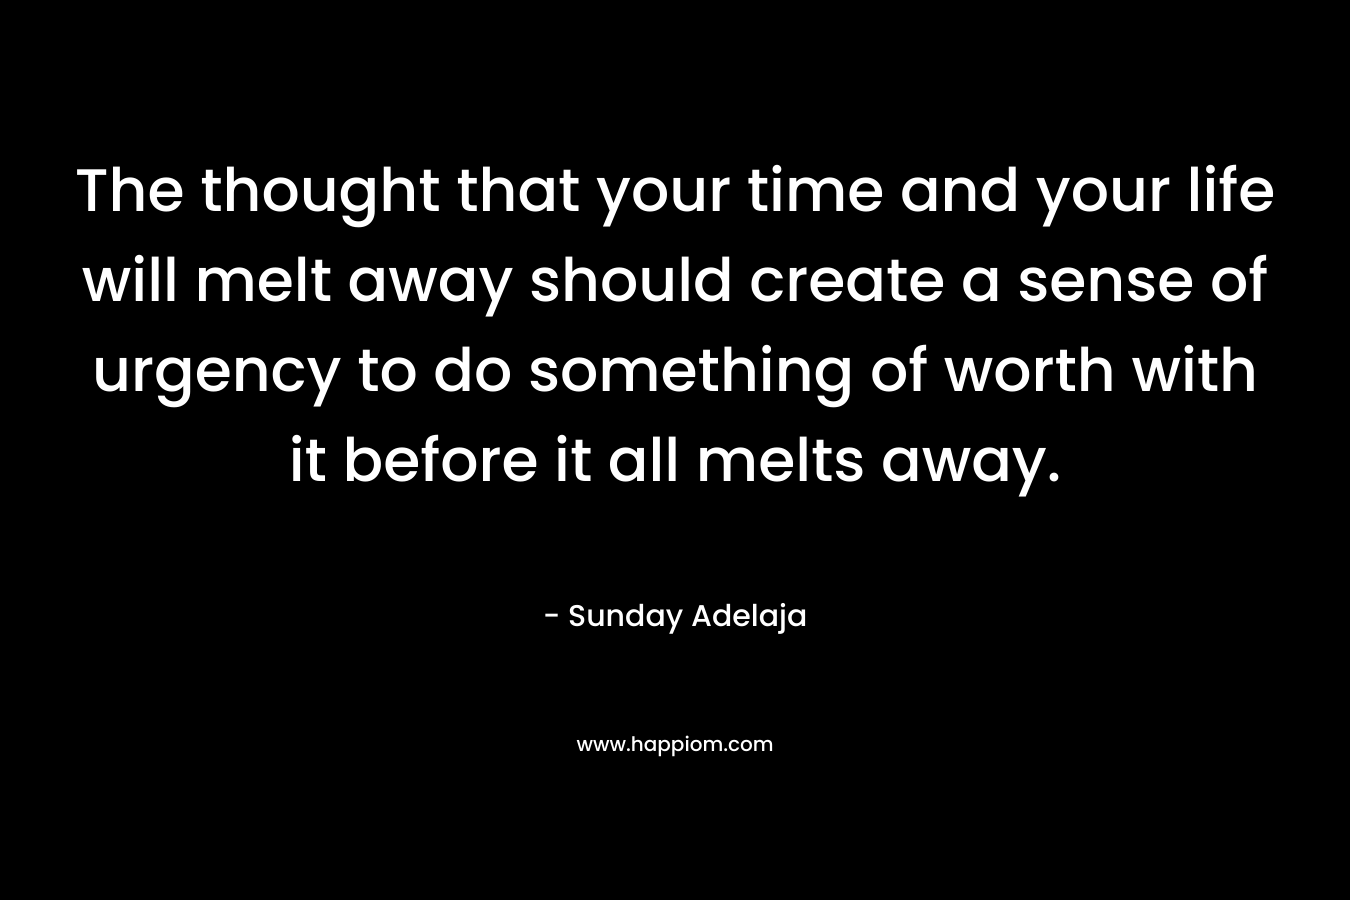 The thought that your time and your life will melt away should create a sense of urgency to do something of worth with it before it all melts away.